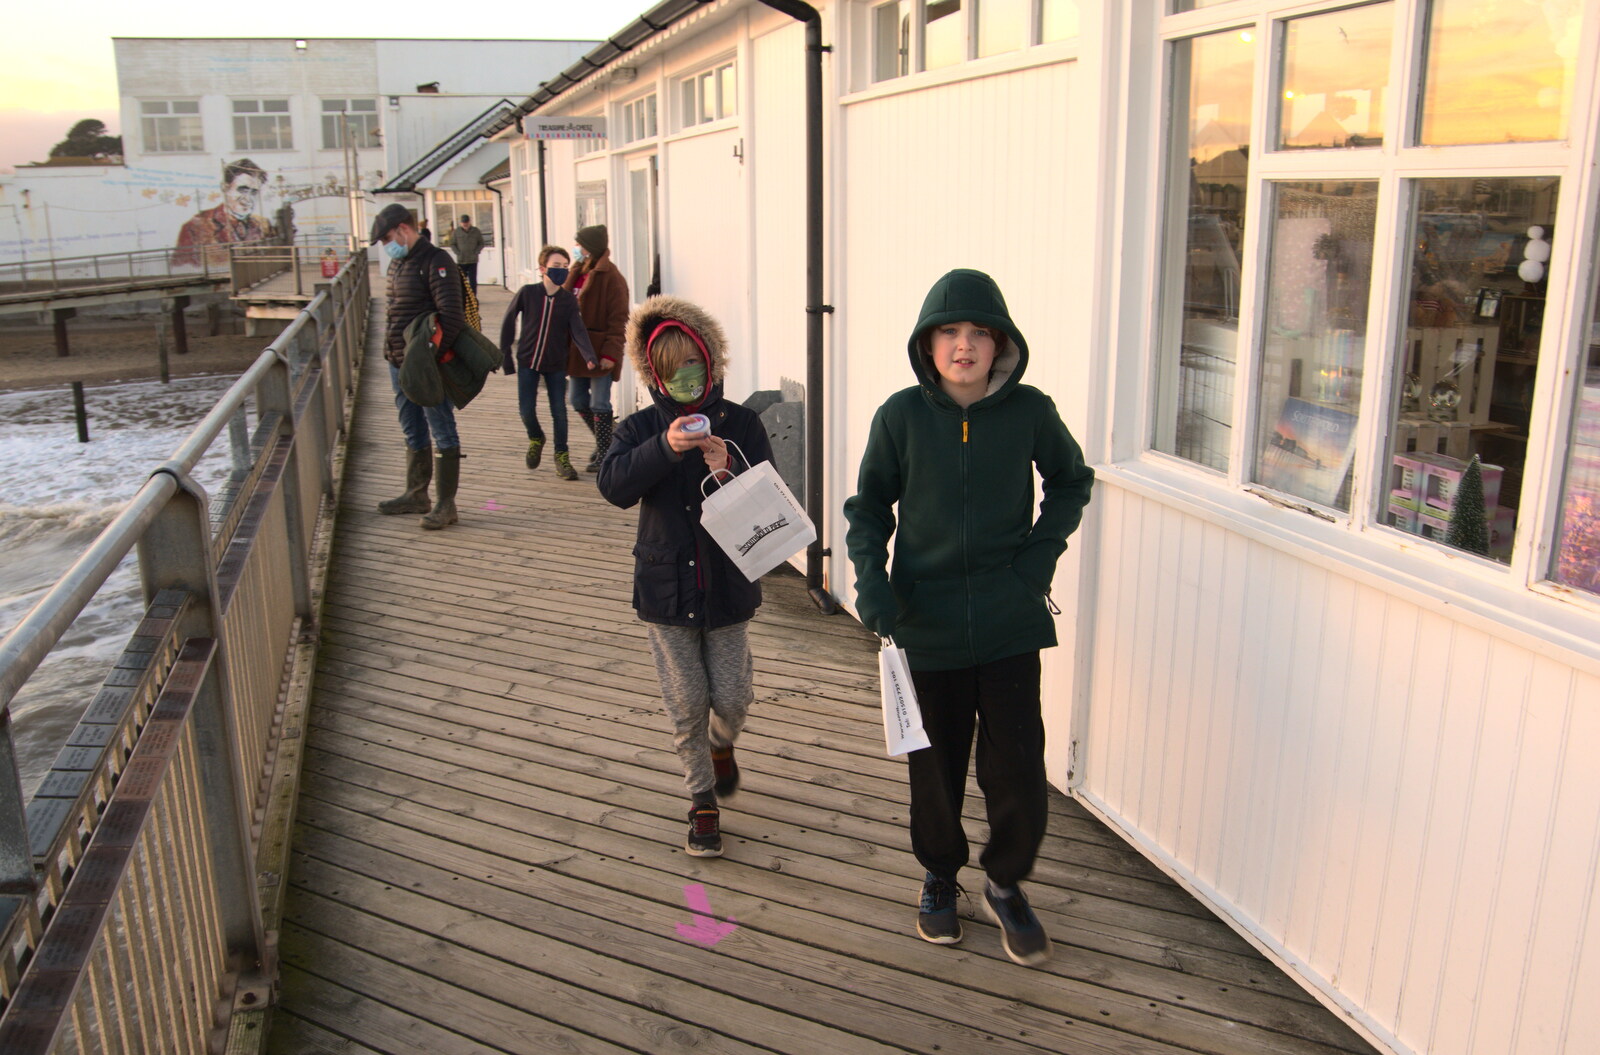 Harry and Fred on the pier from A Return to the Beach, Southwold, Suffolk - 20th December 2020